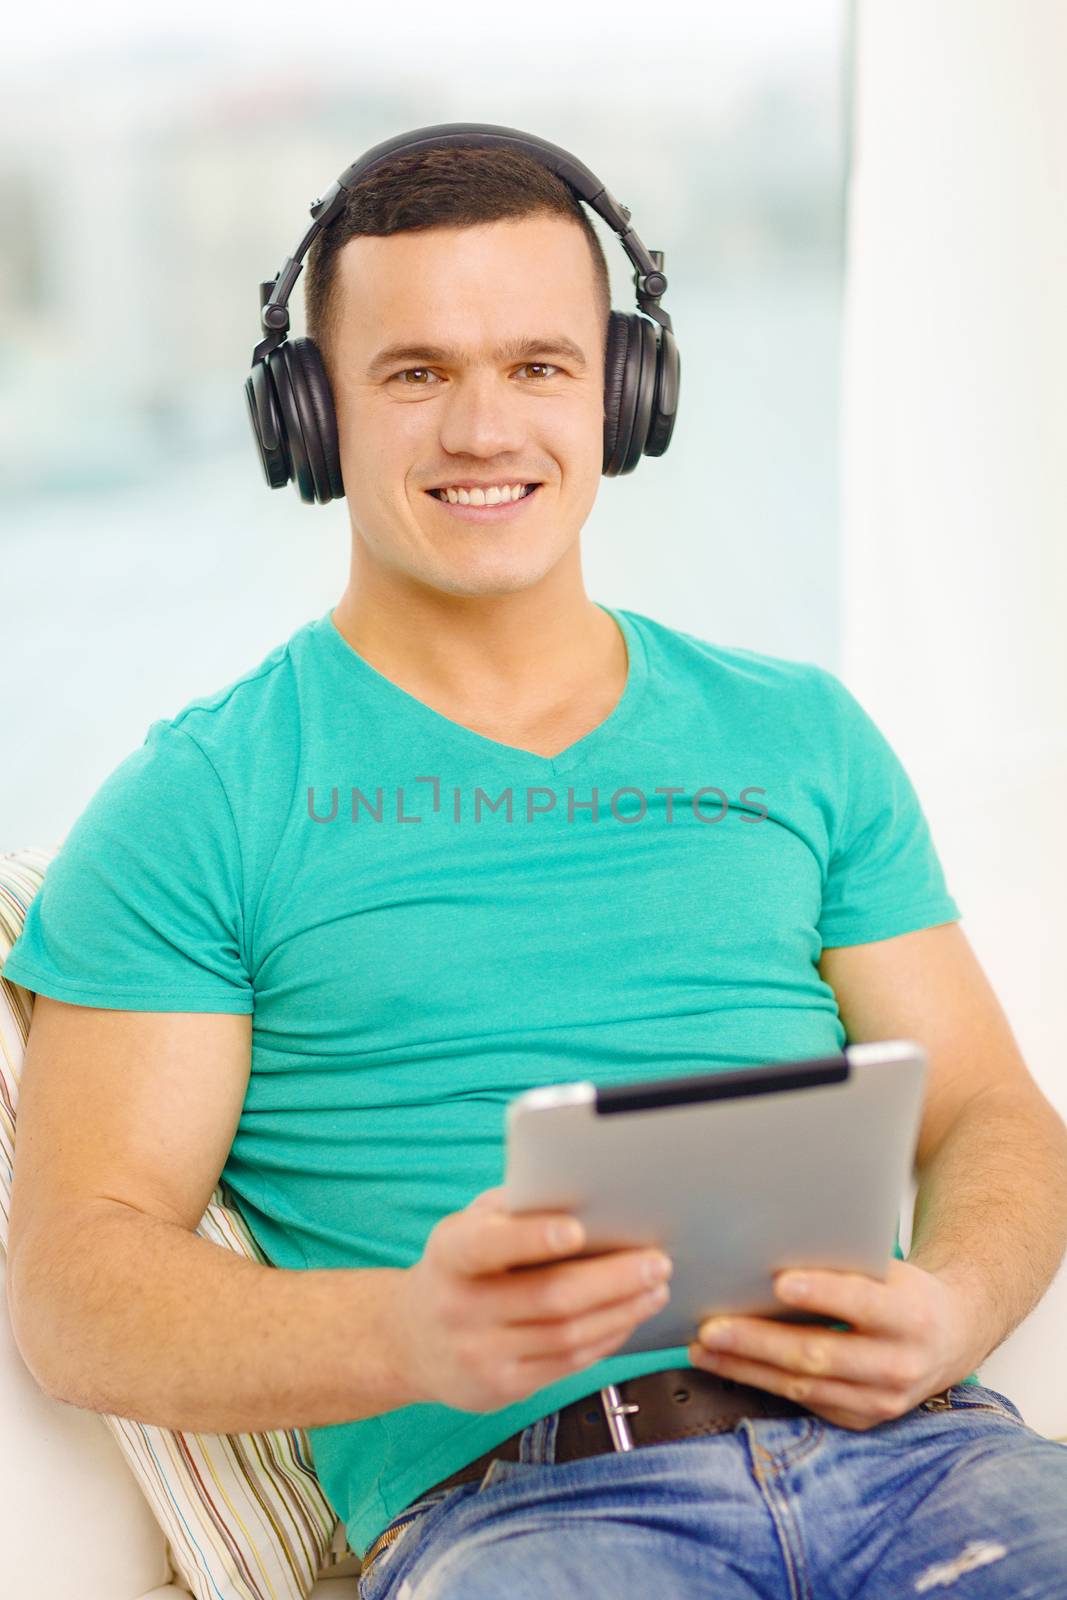 technology, home, music and lifestyle concept - smiling man with tablet pc and headphones at home